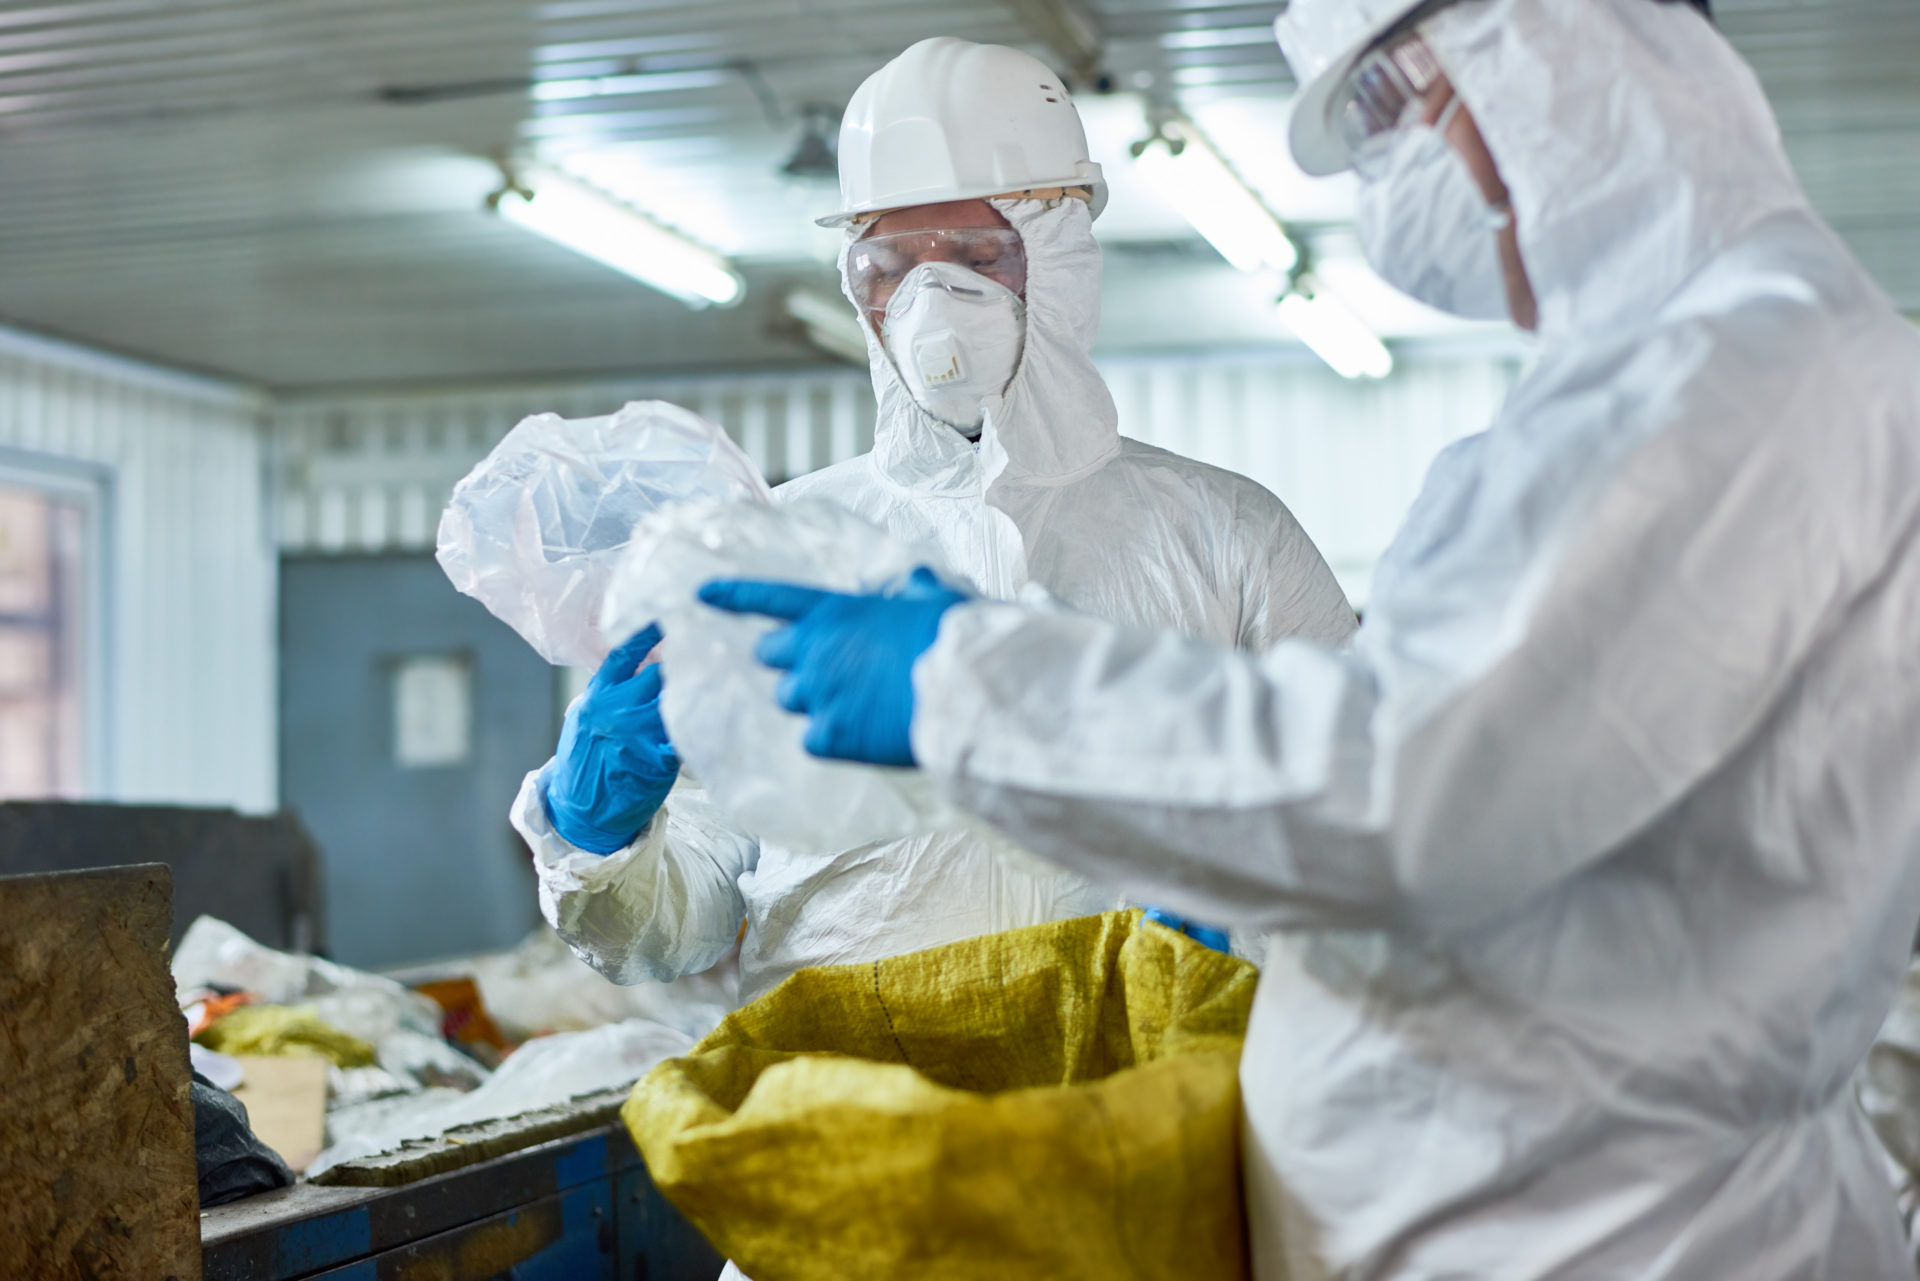 Portrait of two workers  wearing biohazard suits working at waste processing plant sorting trash and reusable plastic standing by conveyor belt